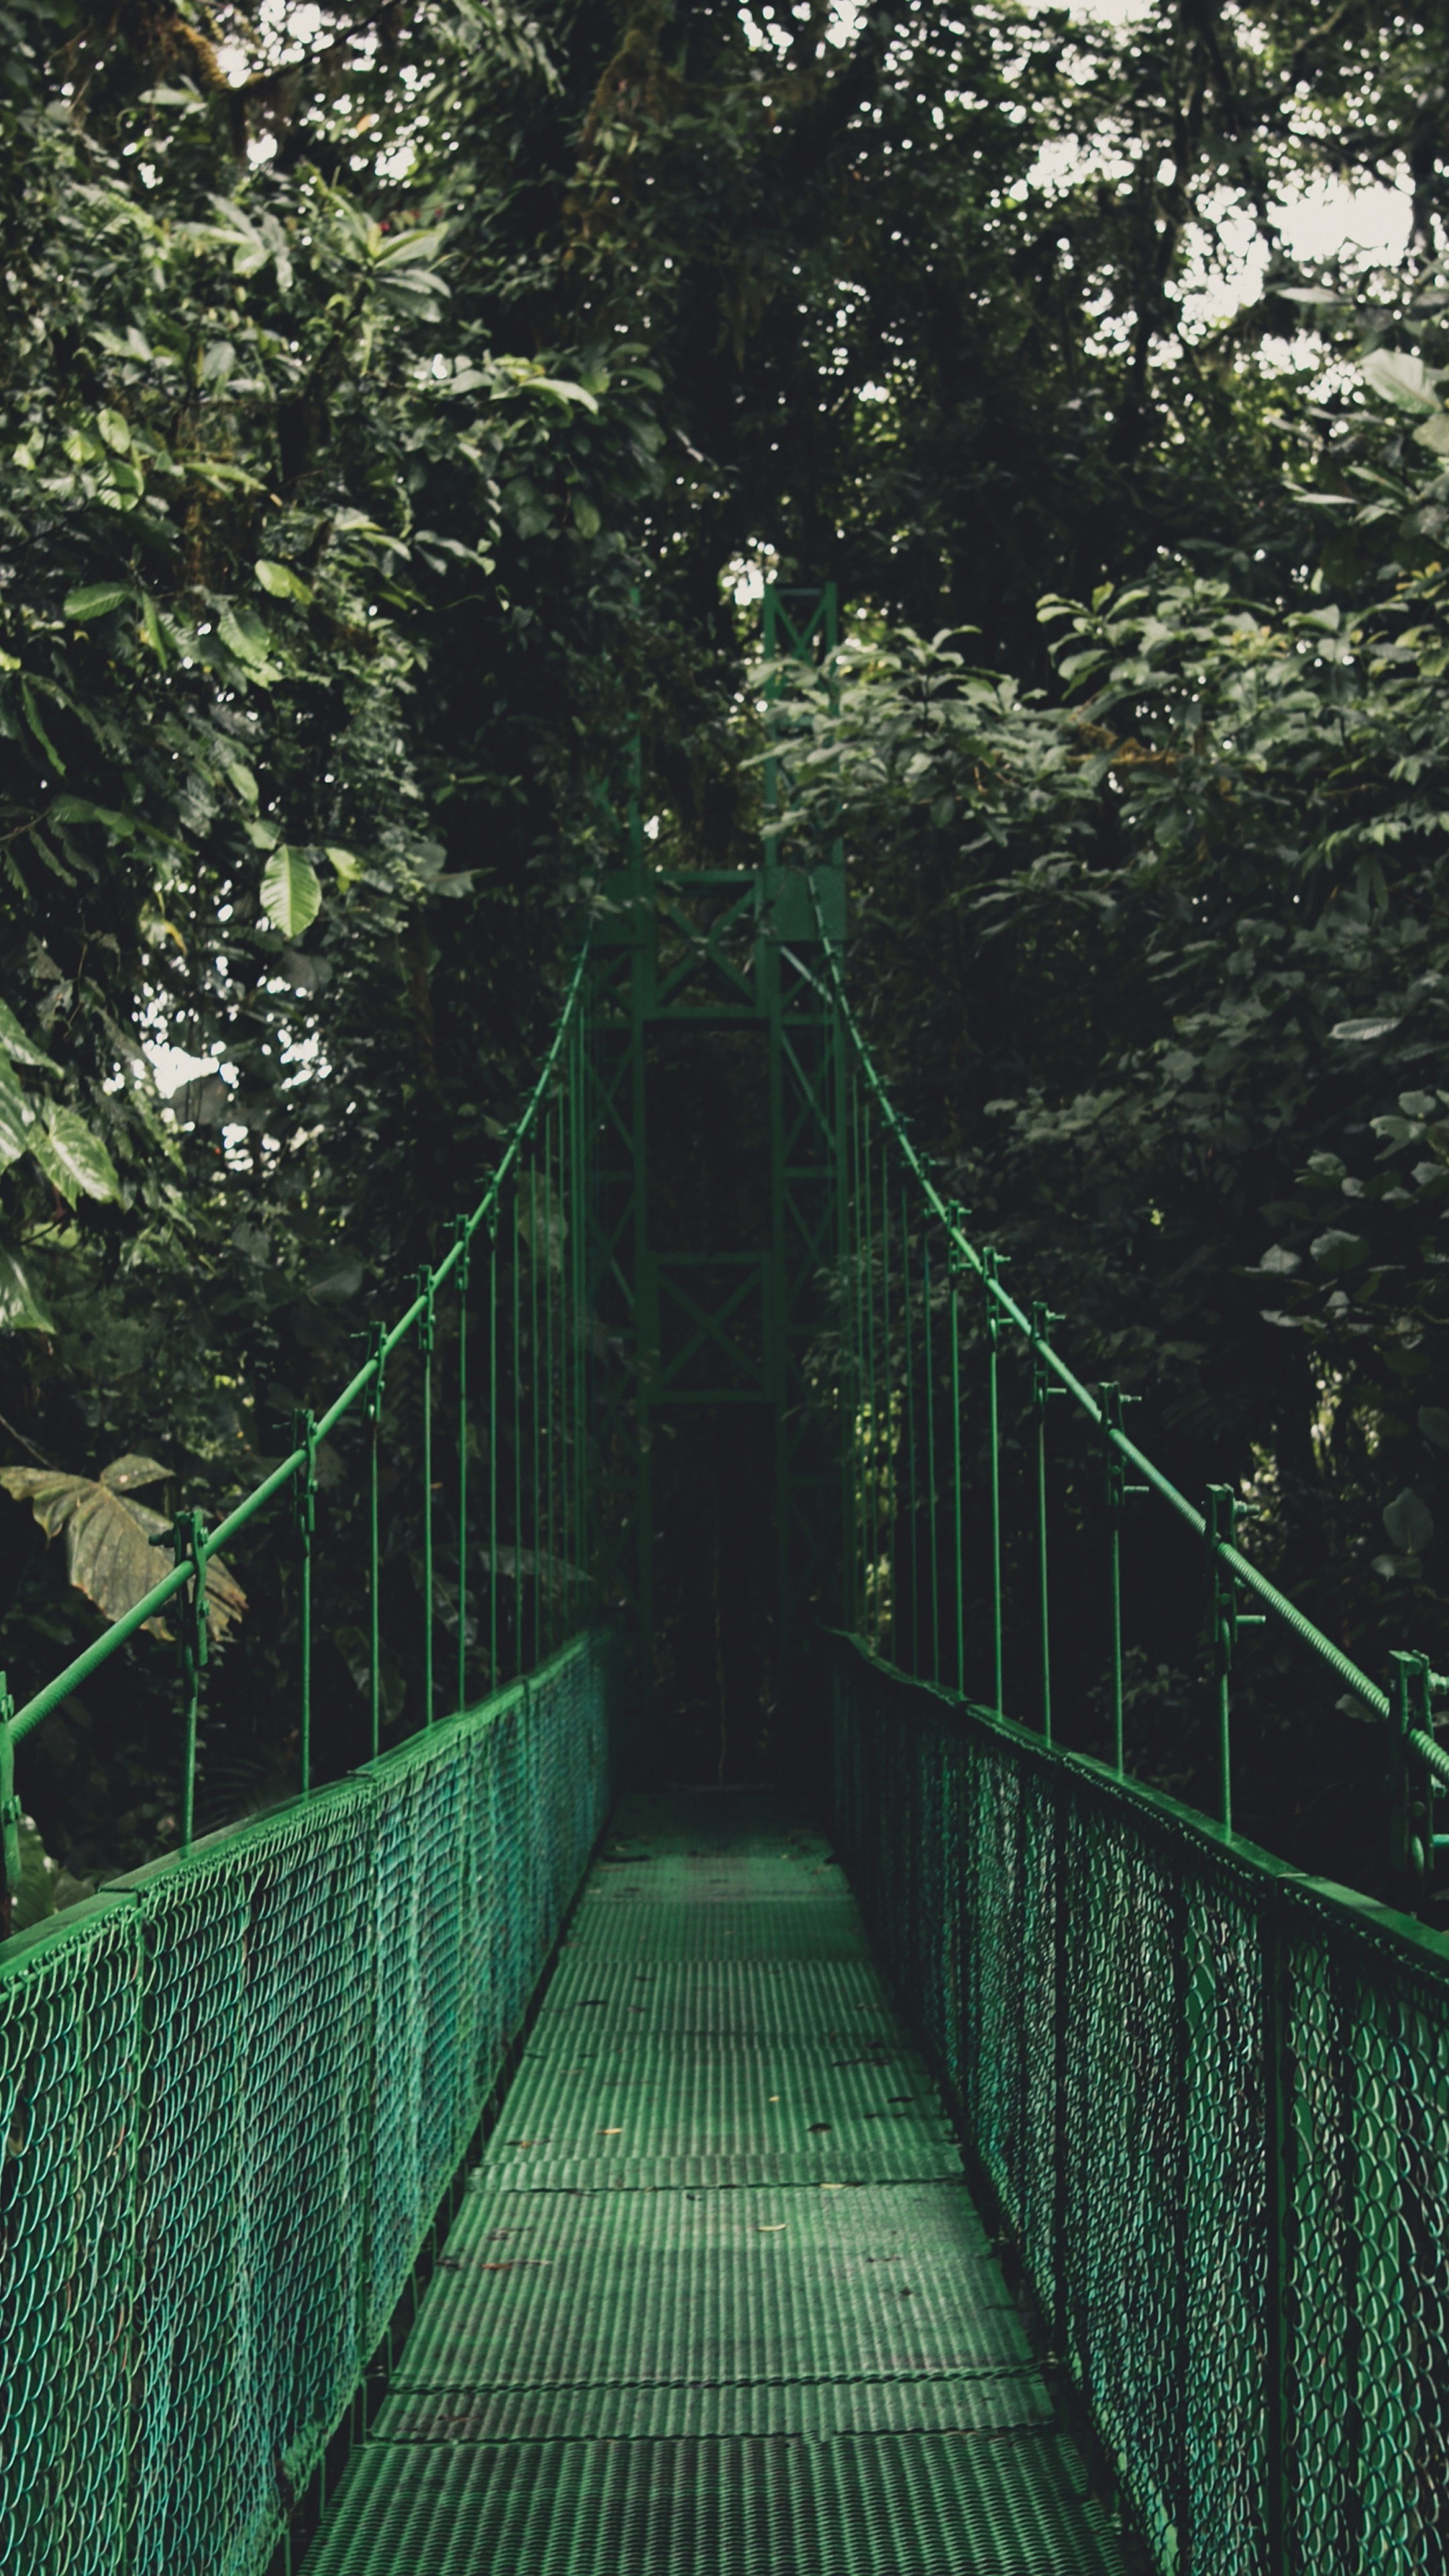 Bridge: A suspension type of span in the jungles, A trail in the forest. 2160x3840 4K Background.